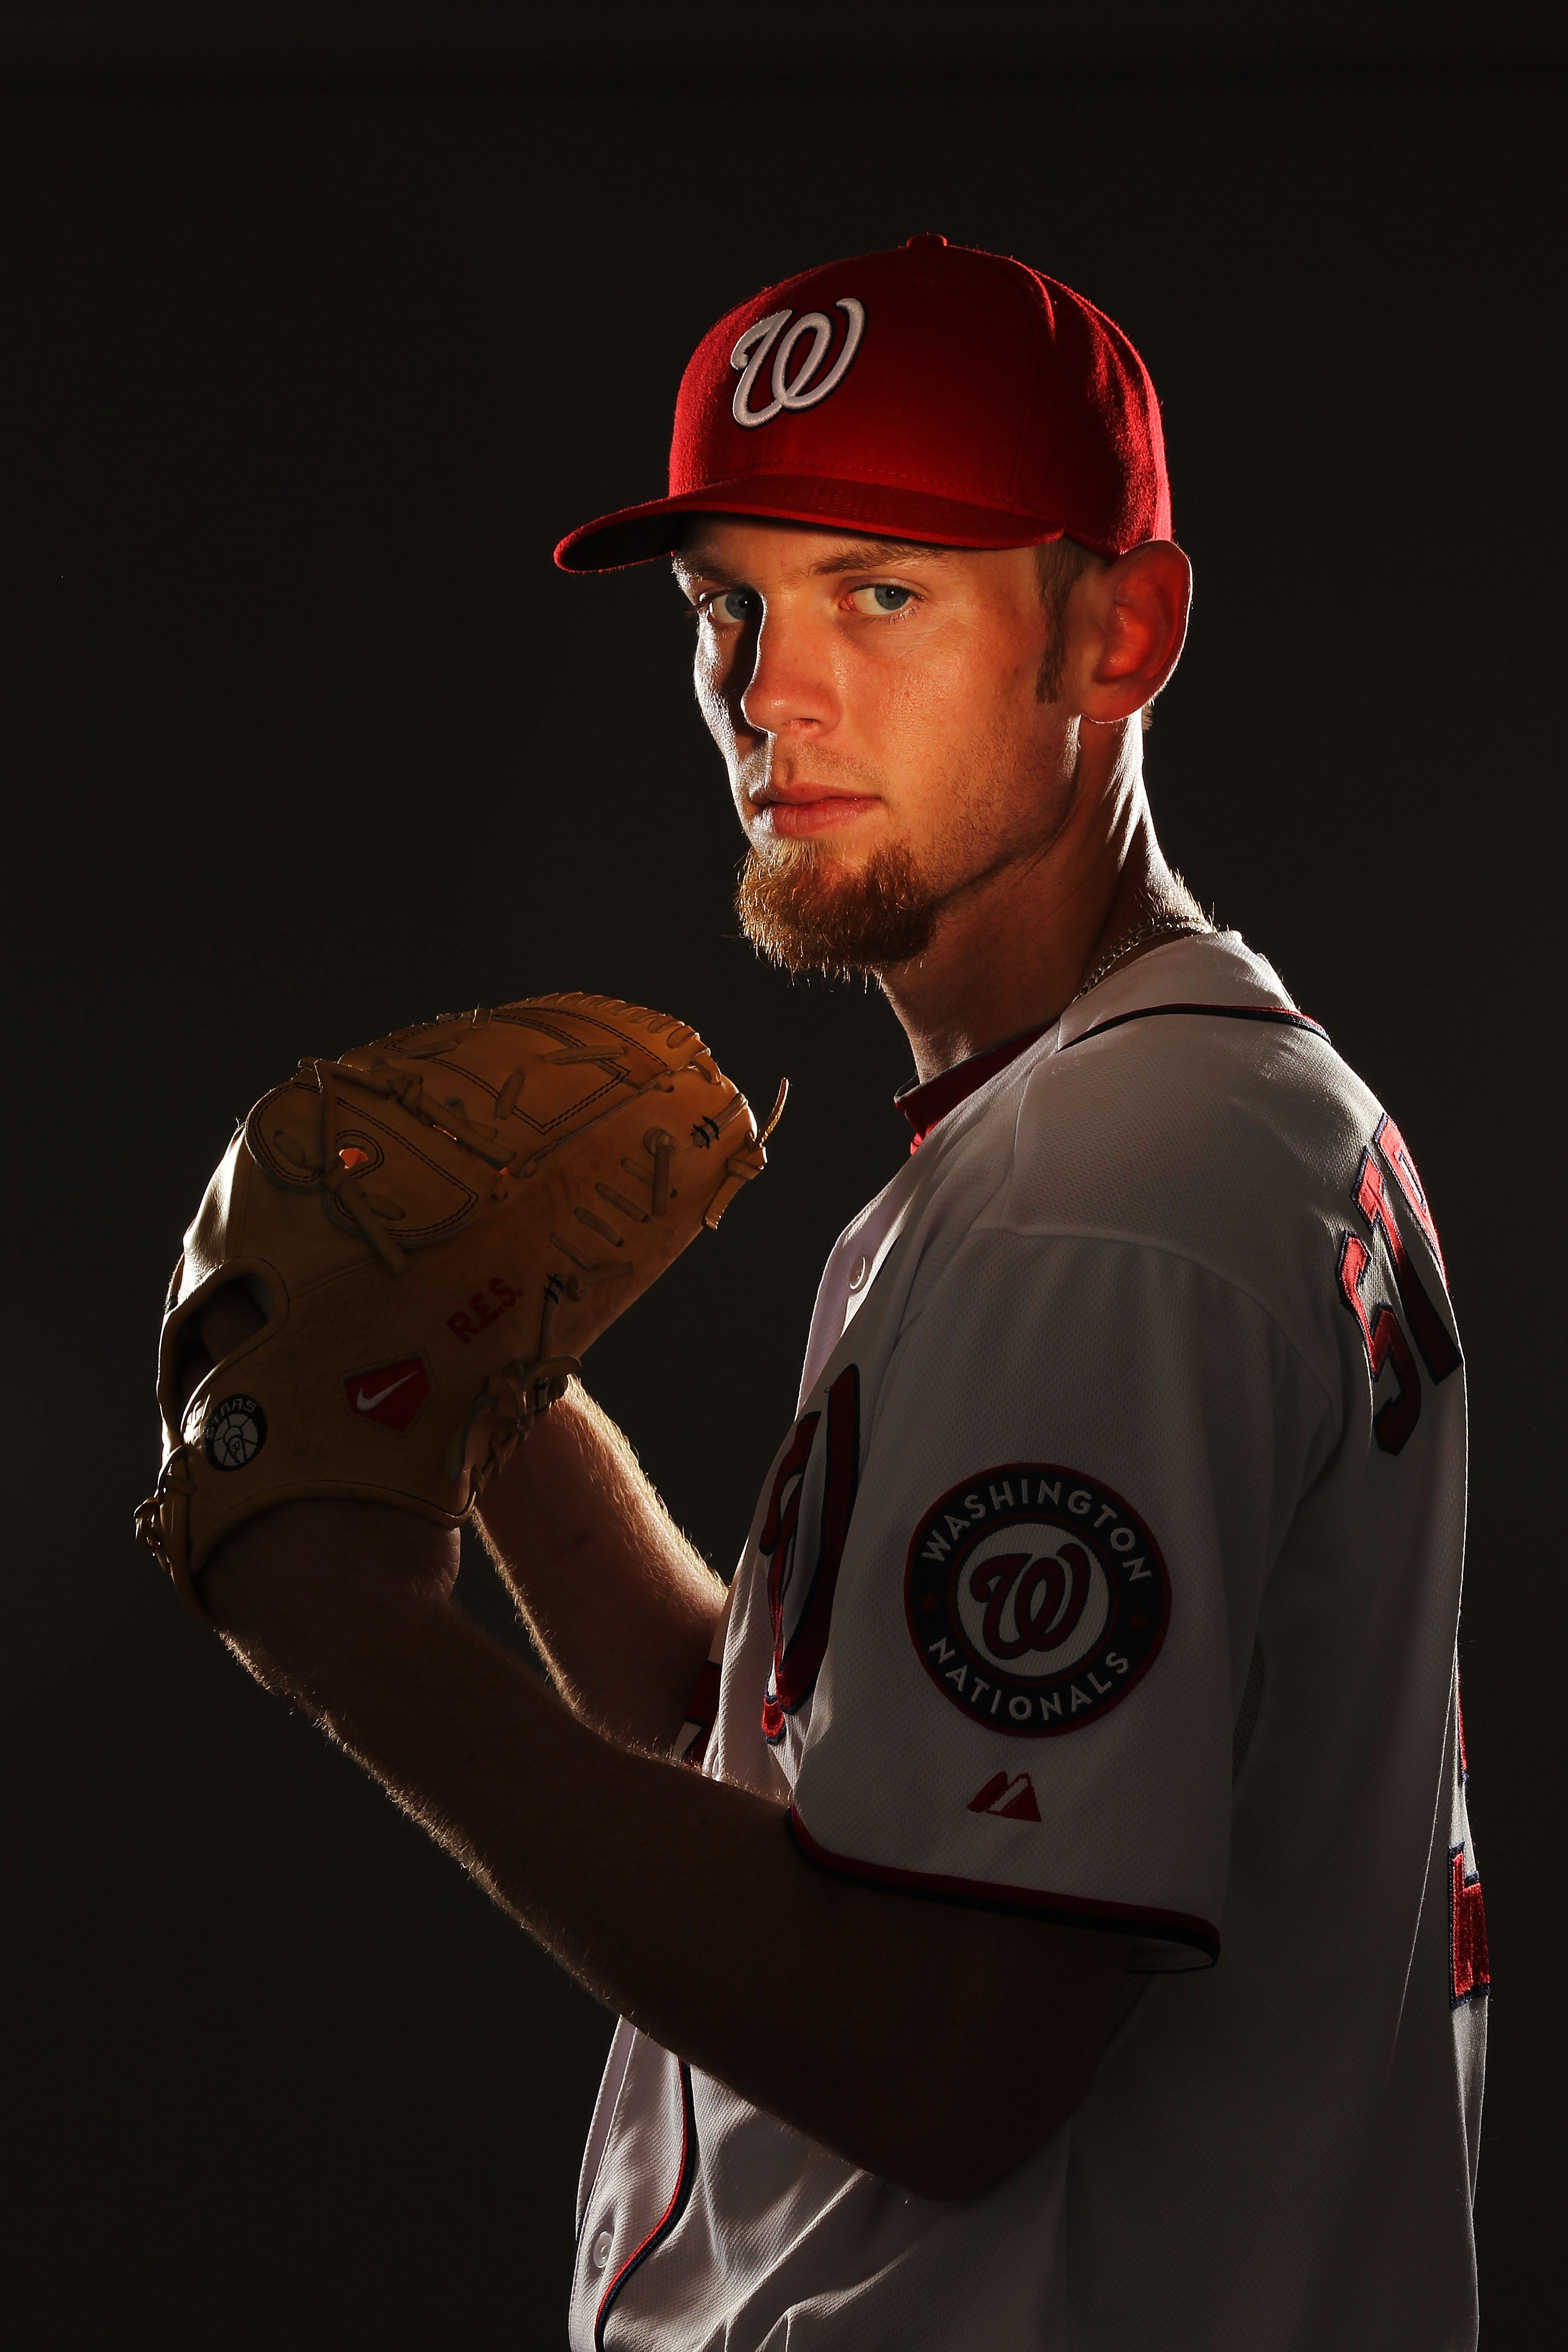 VIERA, FL - FEBRUARY 25:  Stephen Strasburg #37 of the Washington Nationals poses for a portrait during Spring Training Photo Day at Space Coast Stadium on February 25, 2011 in Viera, Florida.  (Photo by Al Bello/Getty Images)